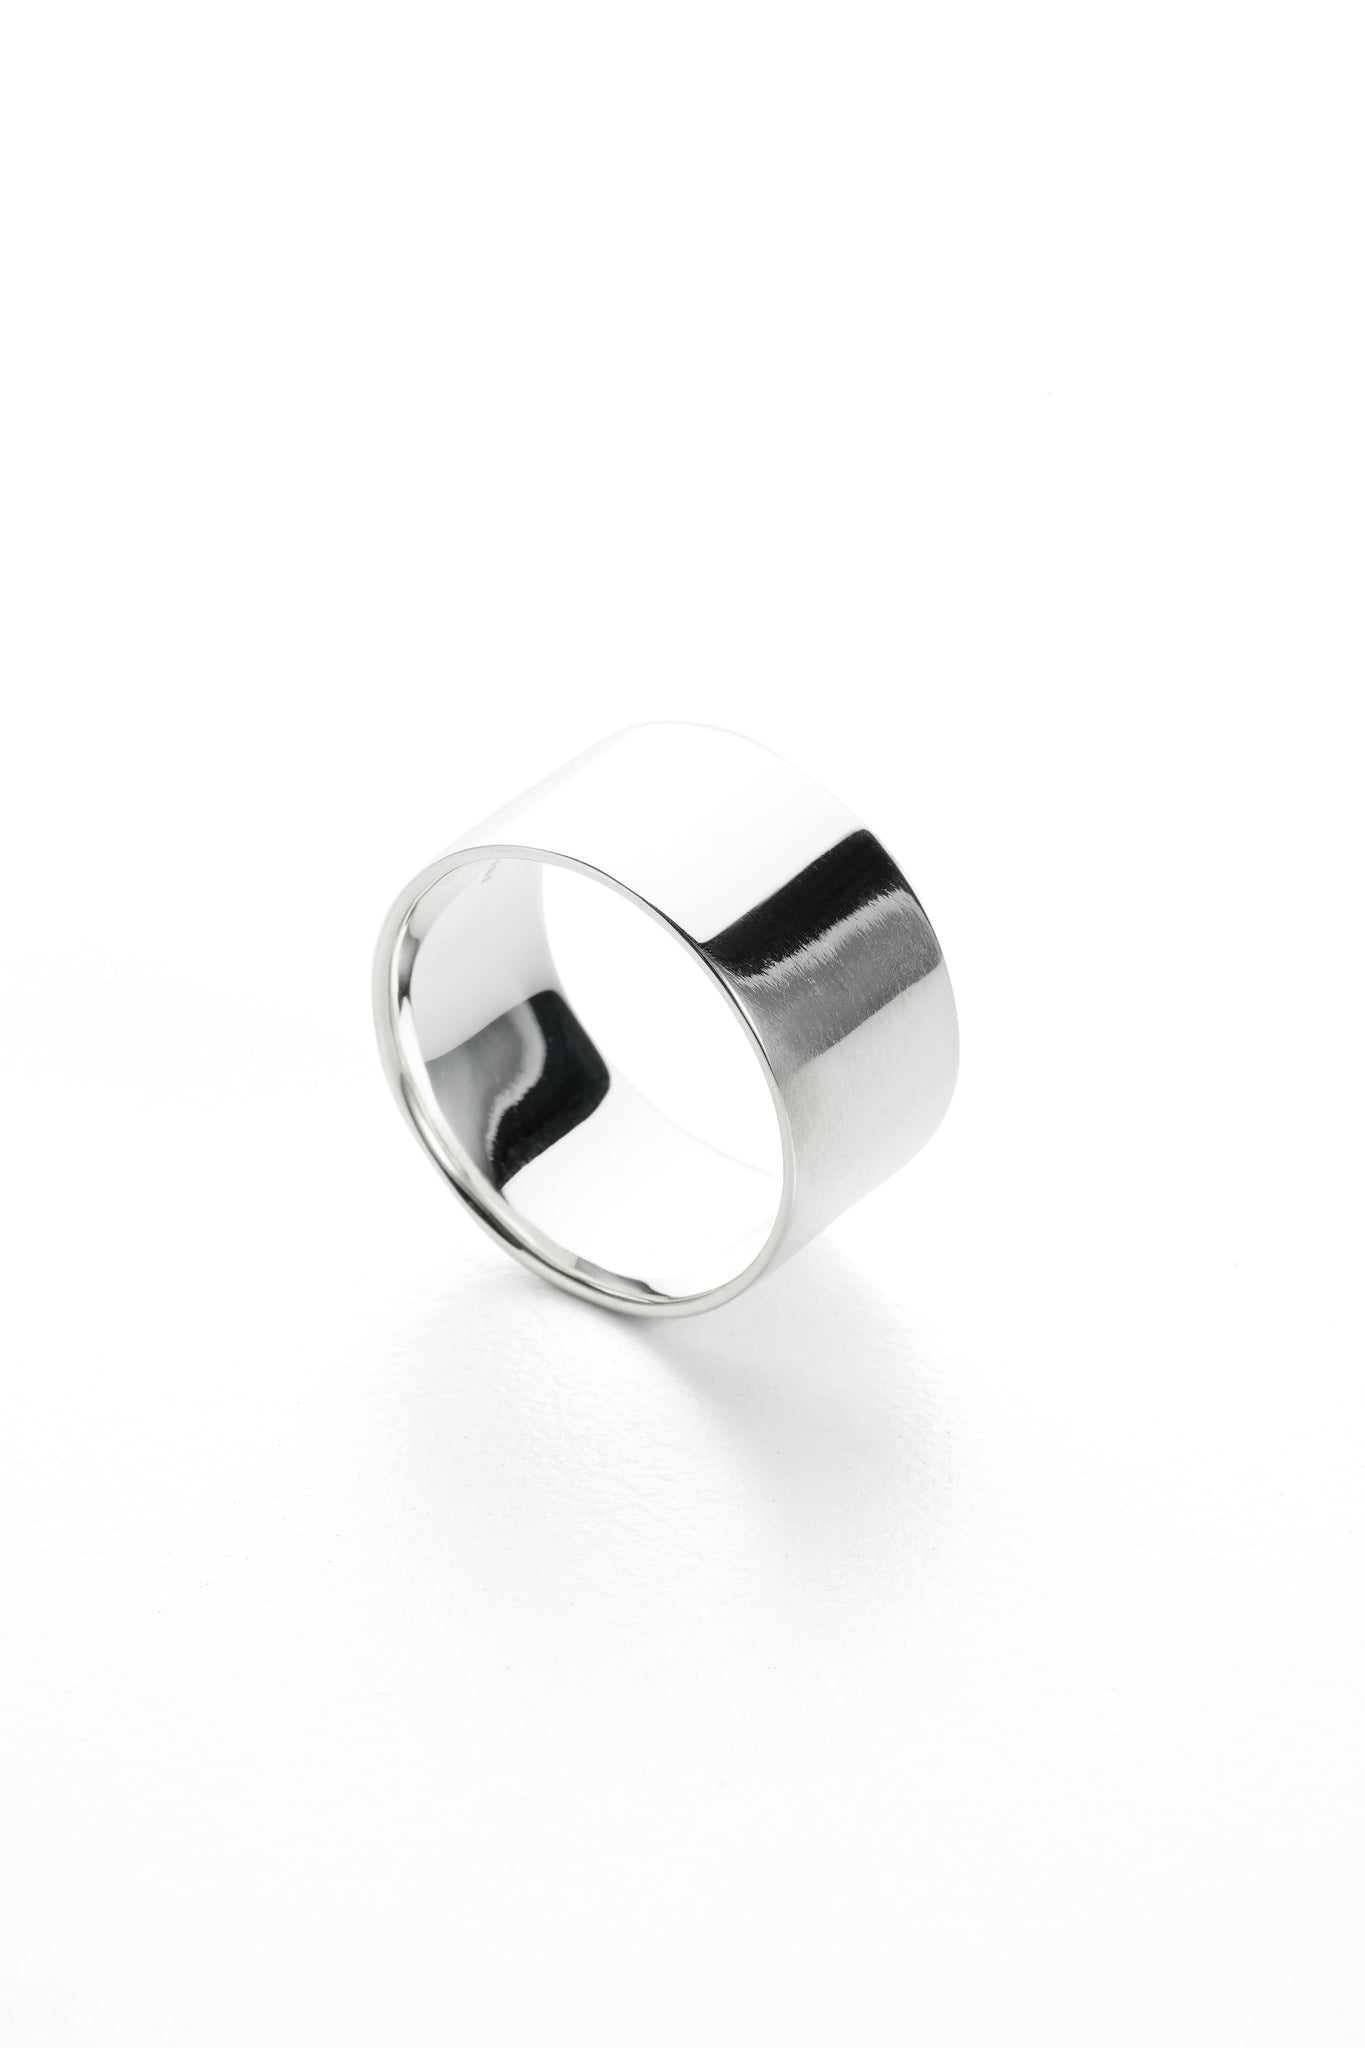 PT RING 03 (SILVER925)